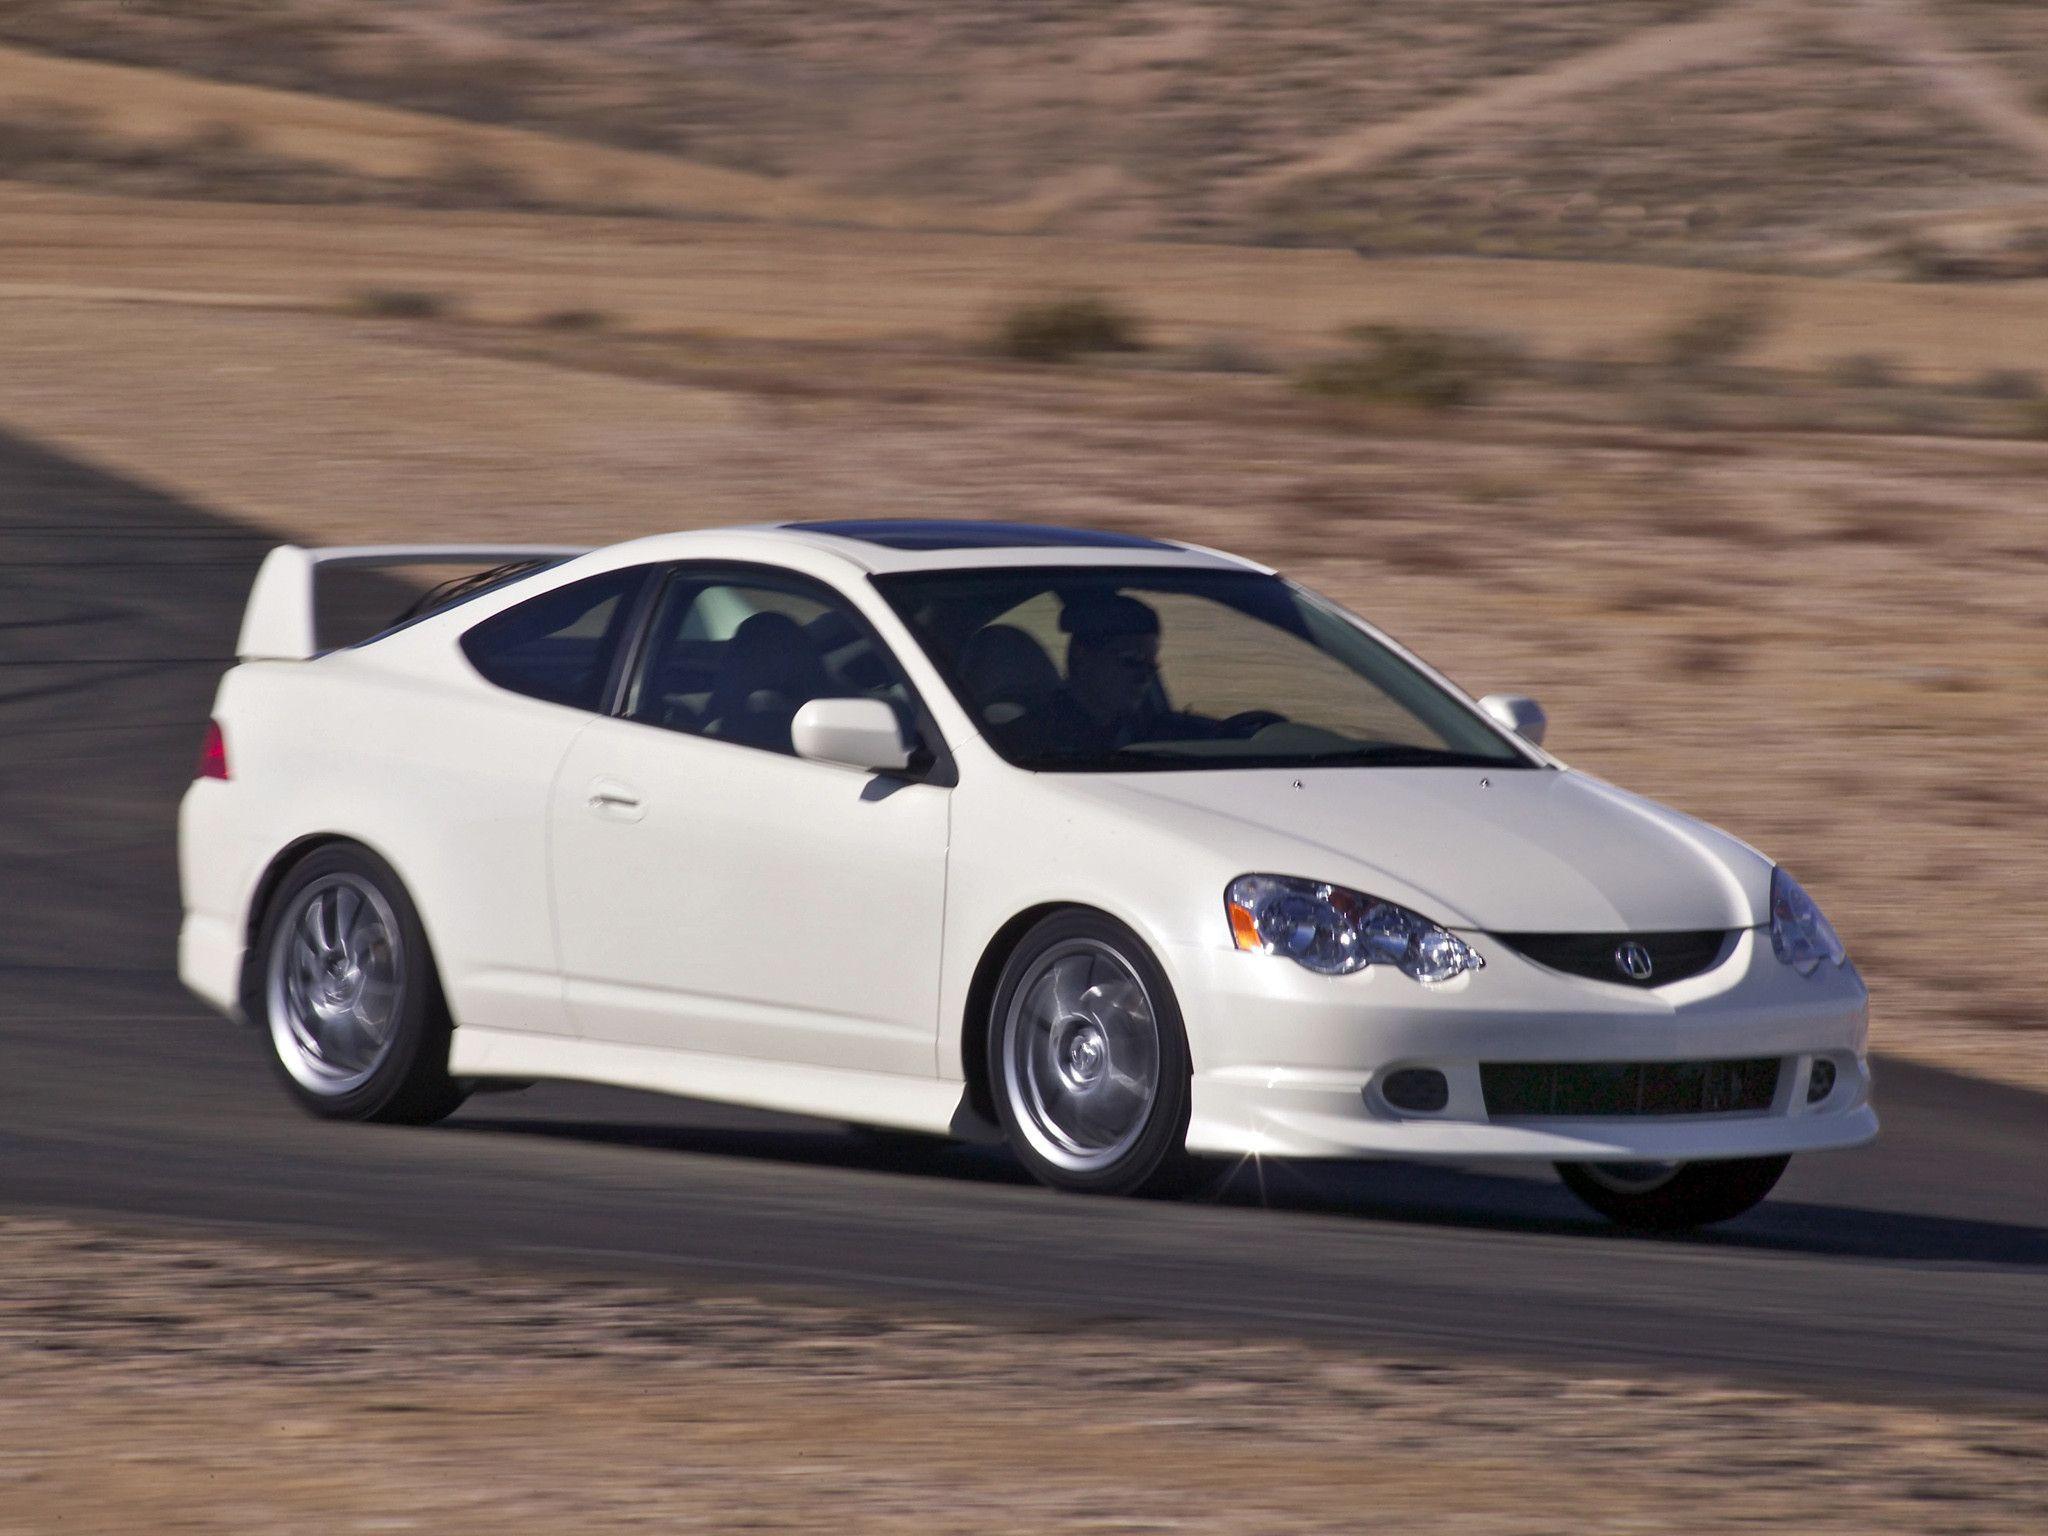 Acura RSX Type S Picture Wallpaper Acura Car Wallpaper